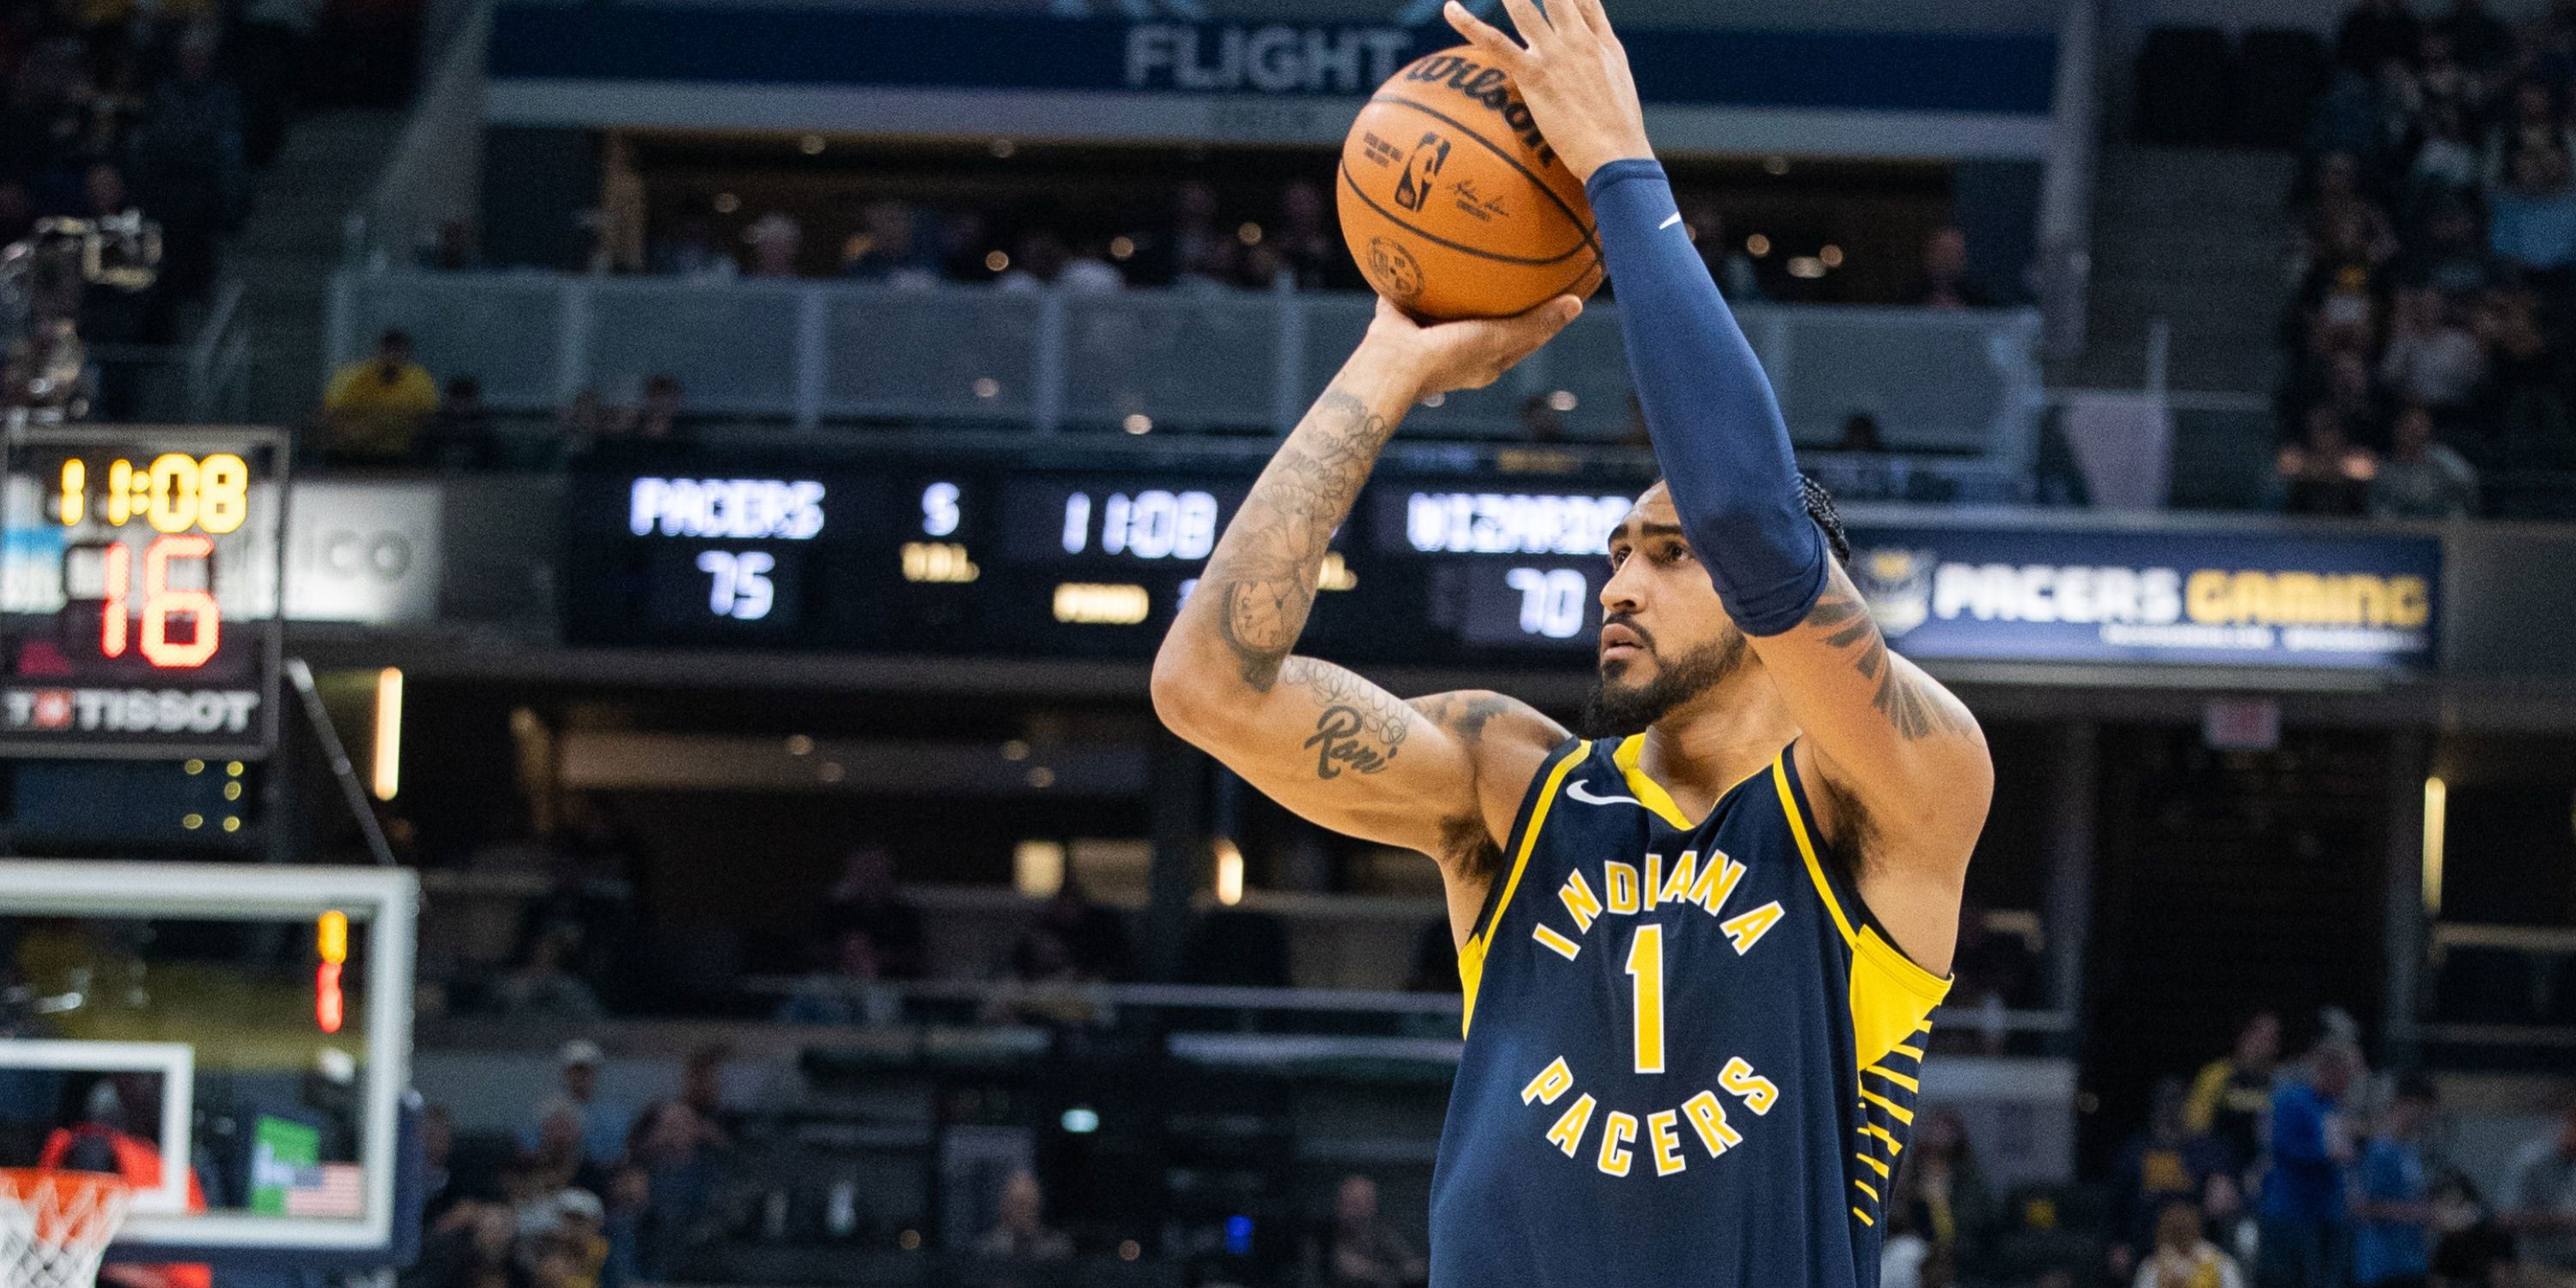 Obi Toppin is making the most of his opportunity with the Indiana Pacers